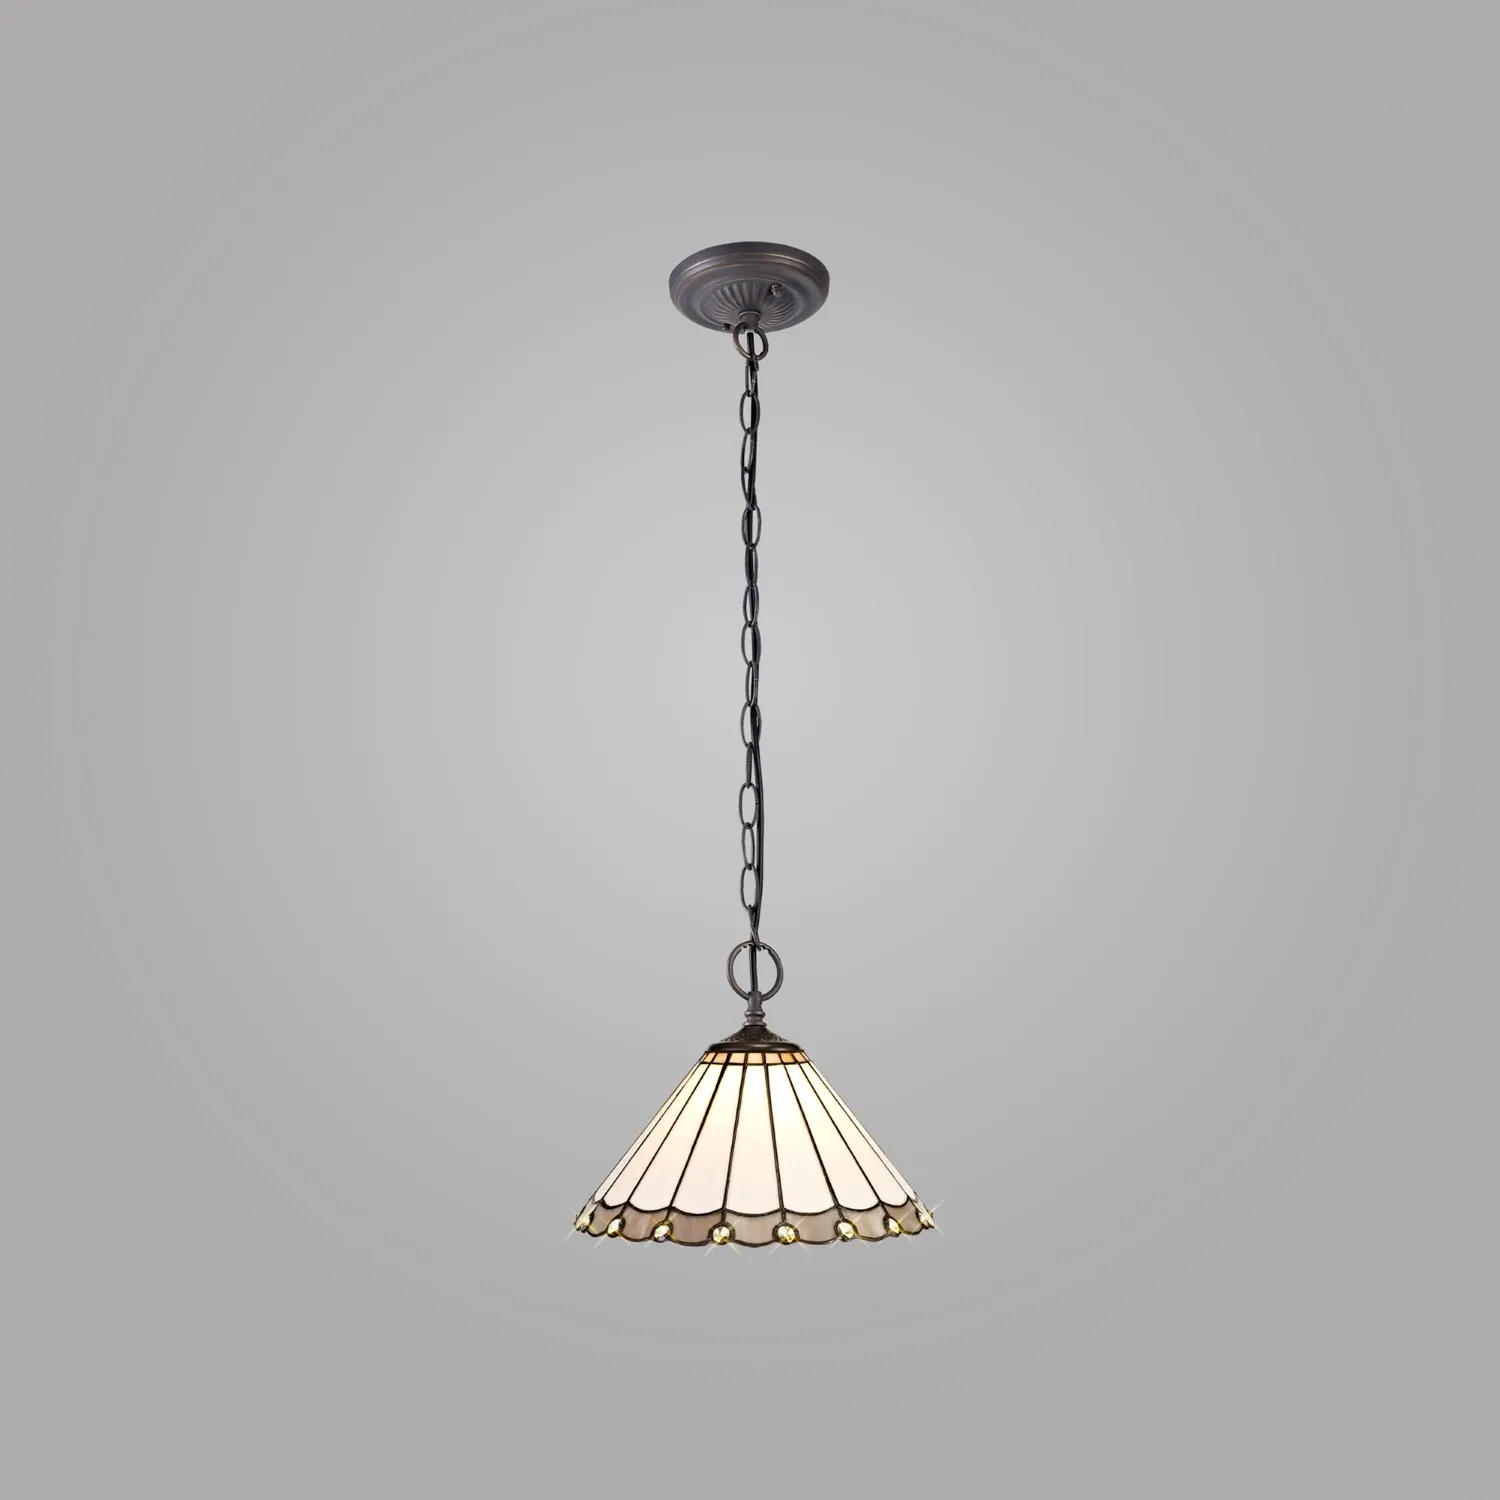 Ware 2 Light Downlighter Pendant E27 With 30cm Tiffany Shade, Grey Cream Crystal Aged Antique Brass